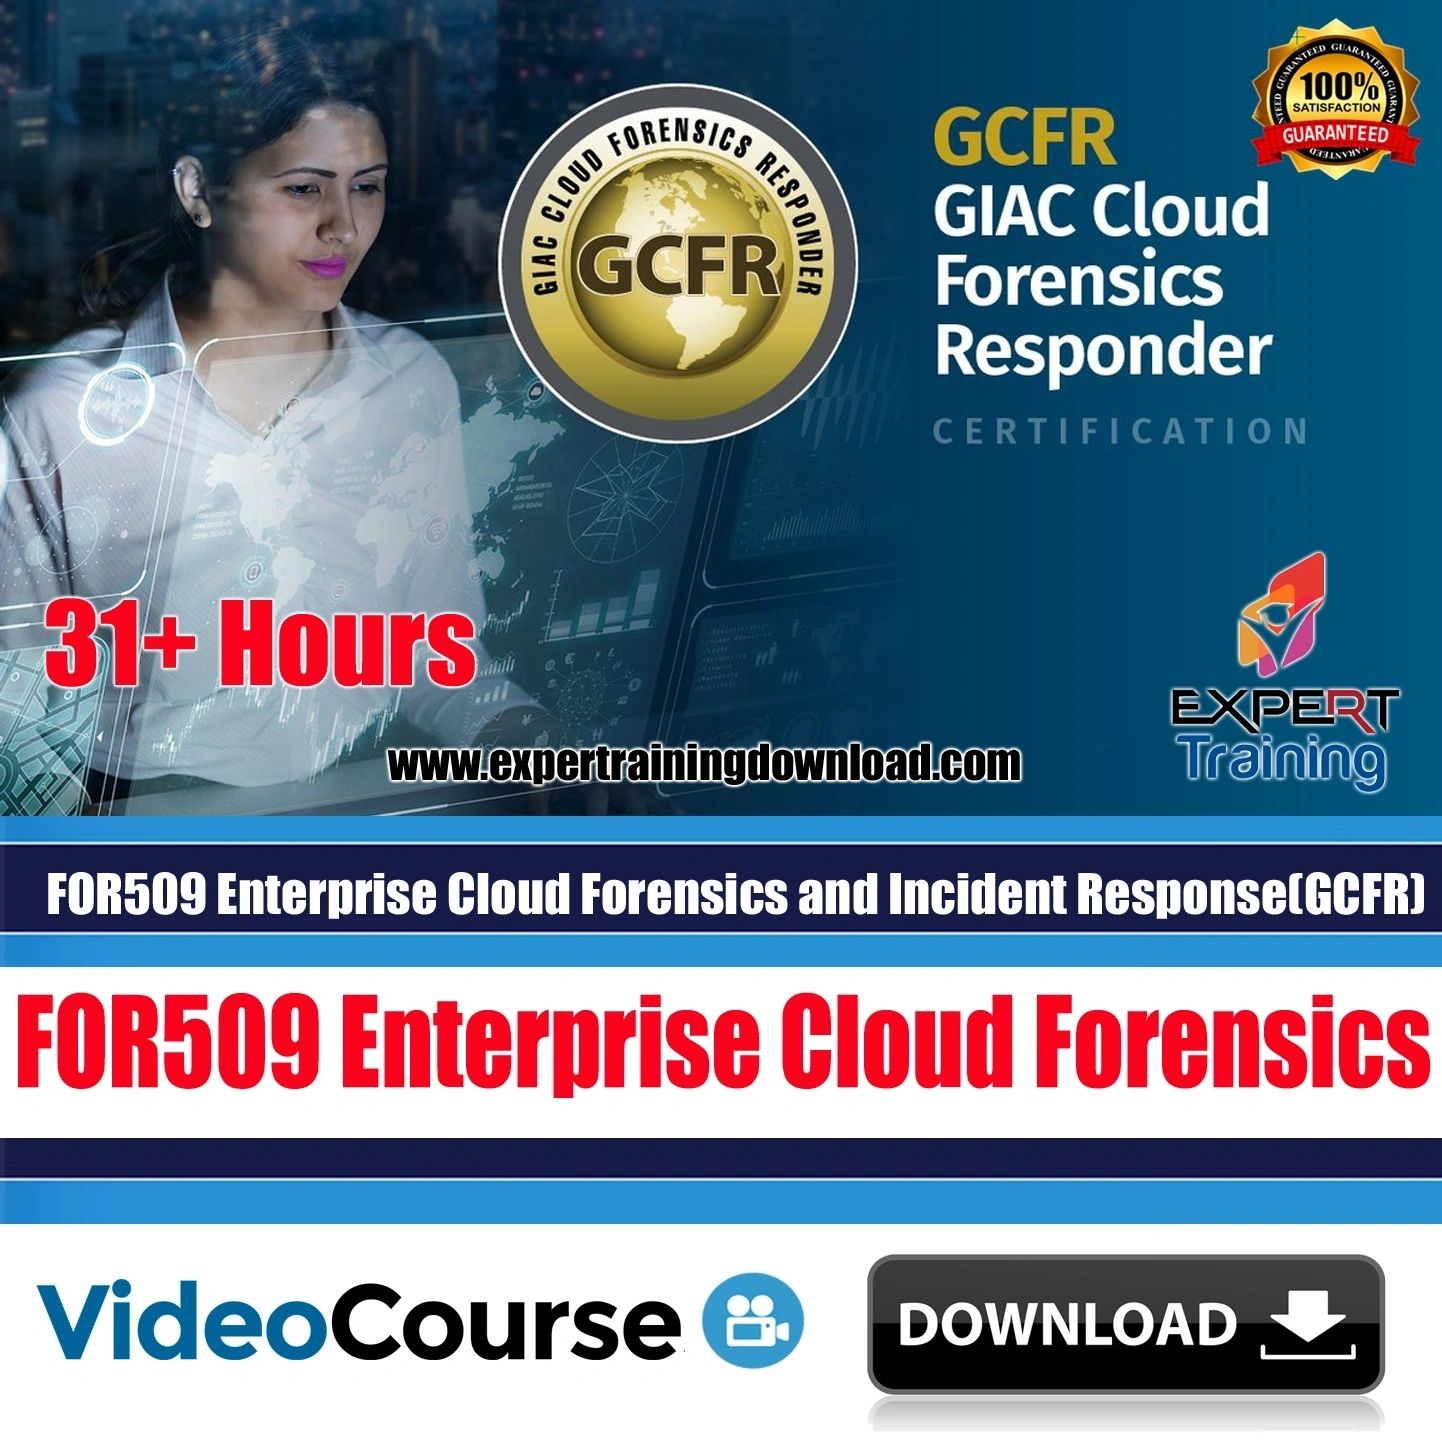 FOR509 Enterprise Cloud Forensics and Incident Response(GCFR) Course (VOD, USB, PDF )